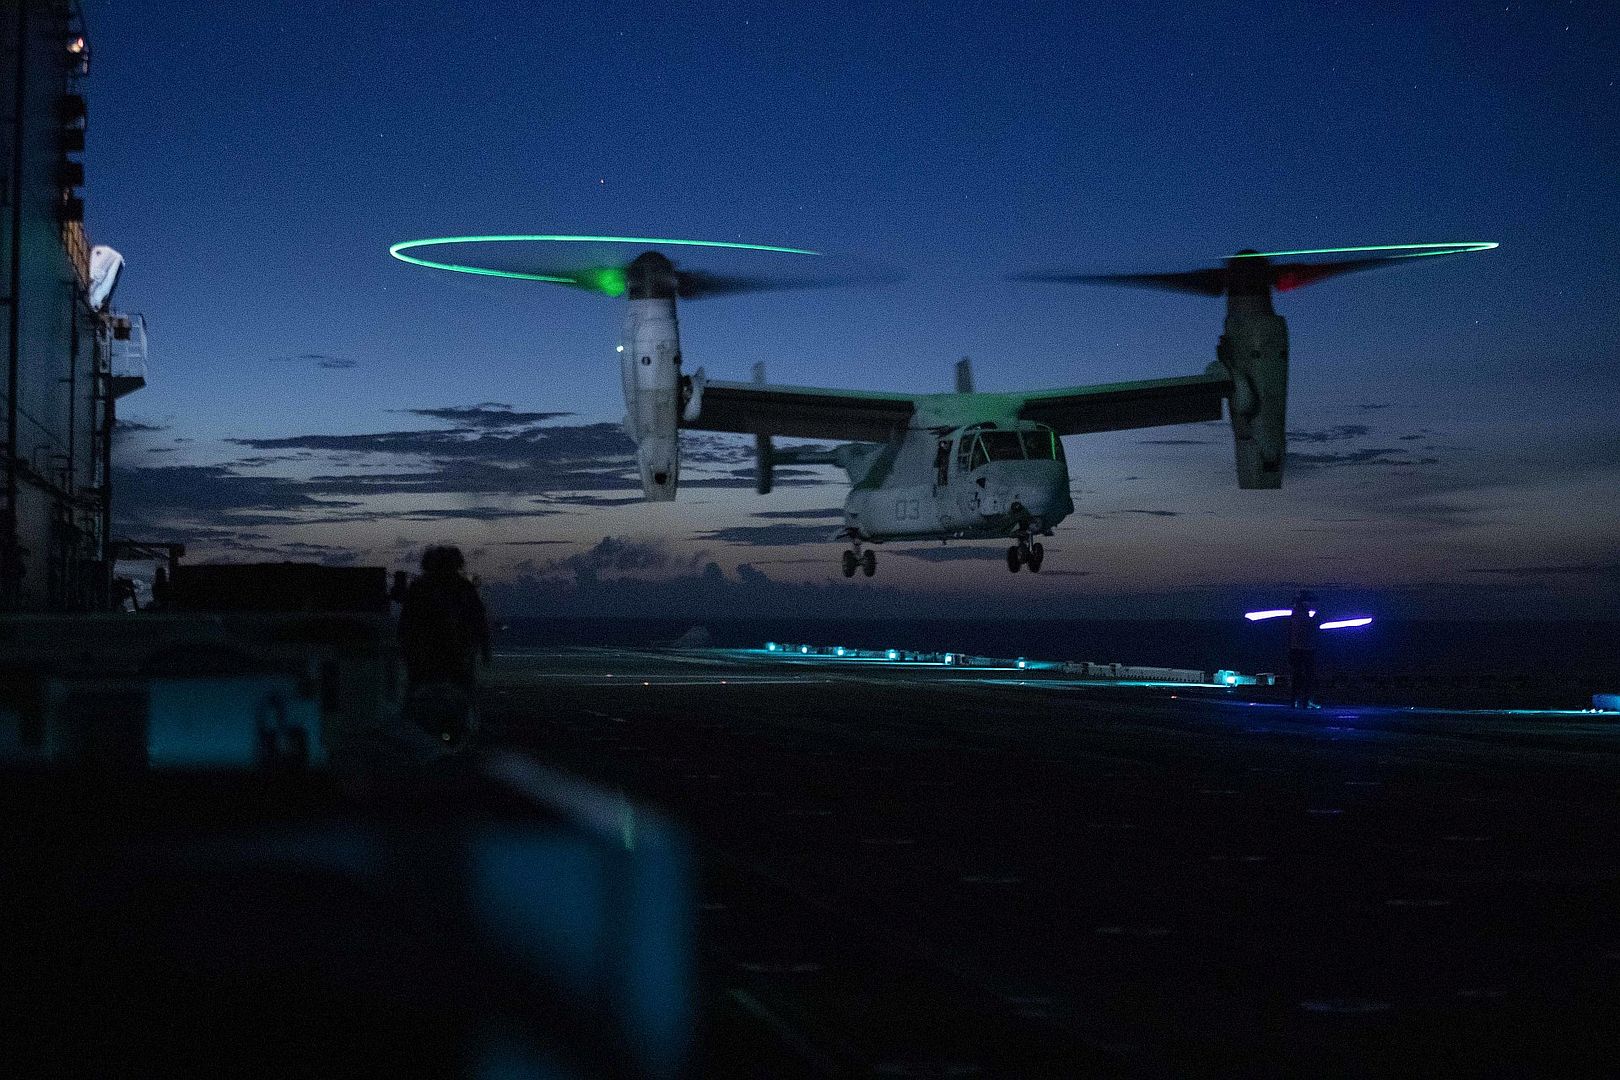 22 Osprey Tiltrotor Aircraft Assigned To Marine Medium Tiltrotor Squadron 262 Takes Off From Amphibious Assault Carrier USS Tripoli